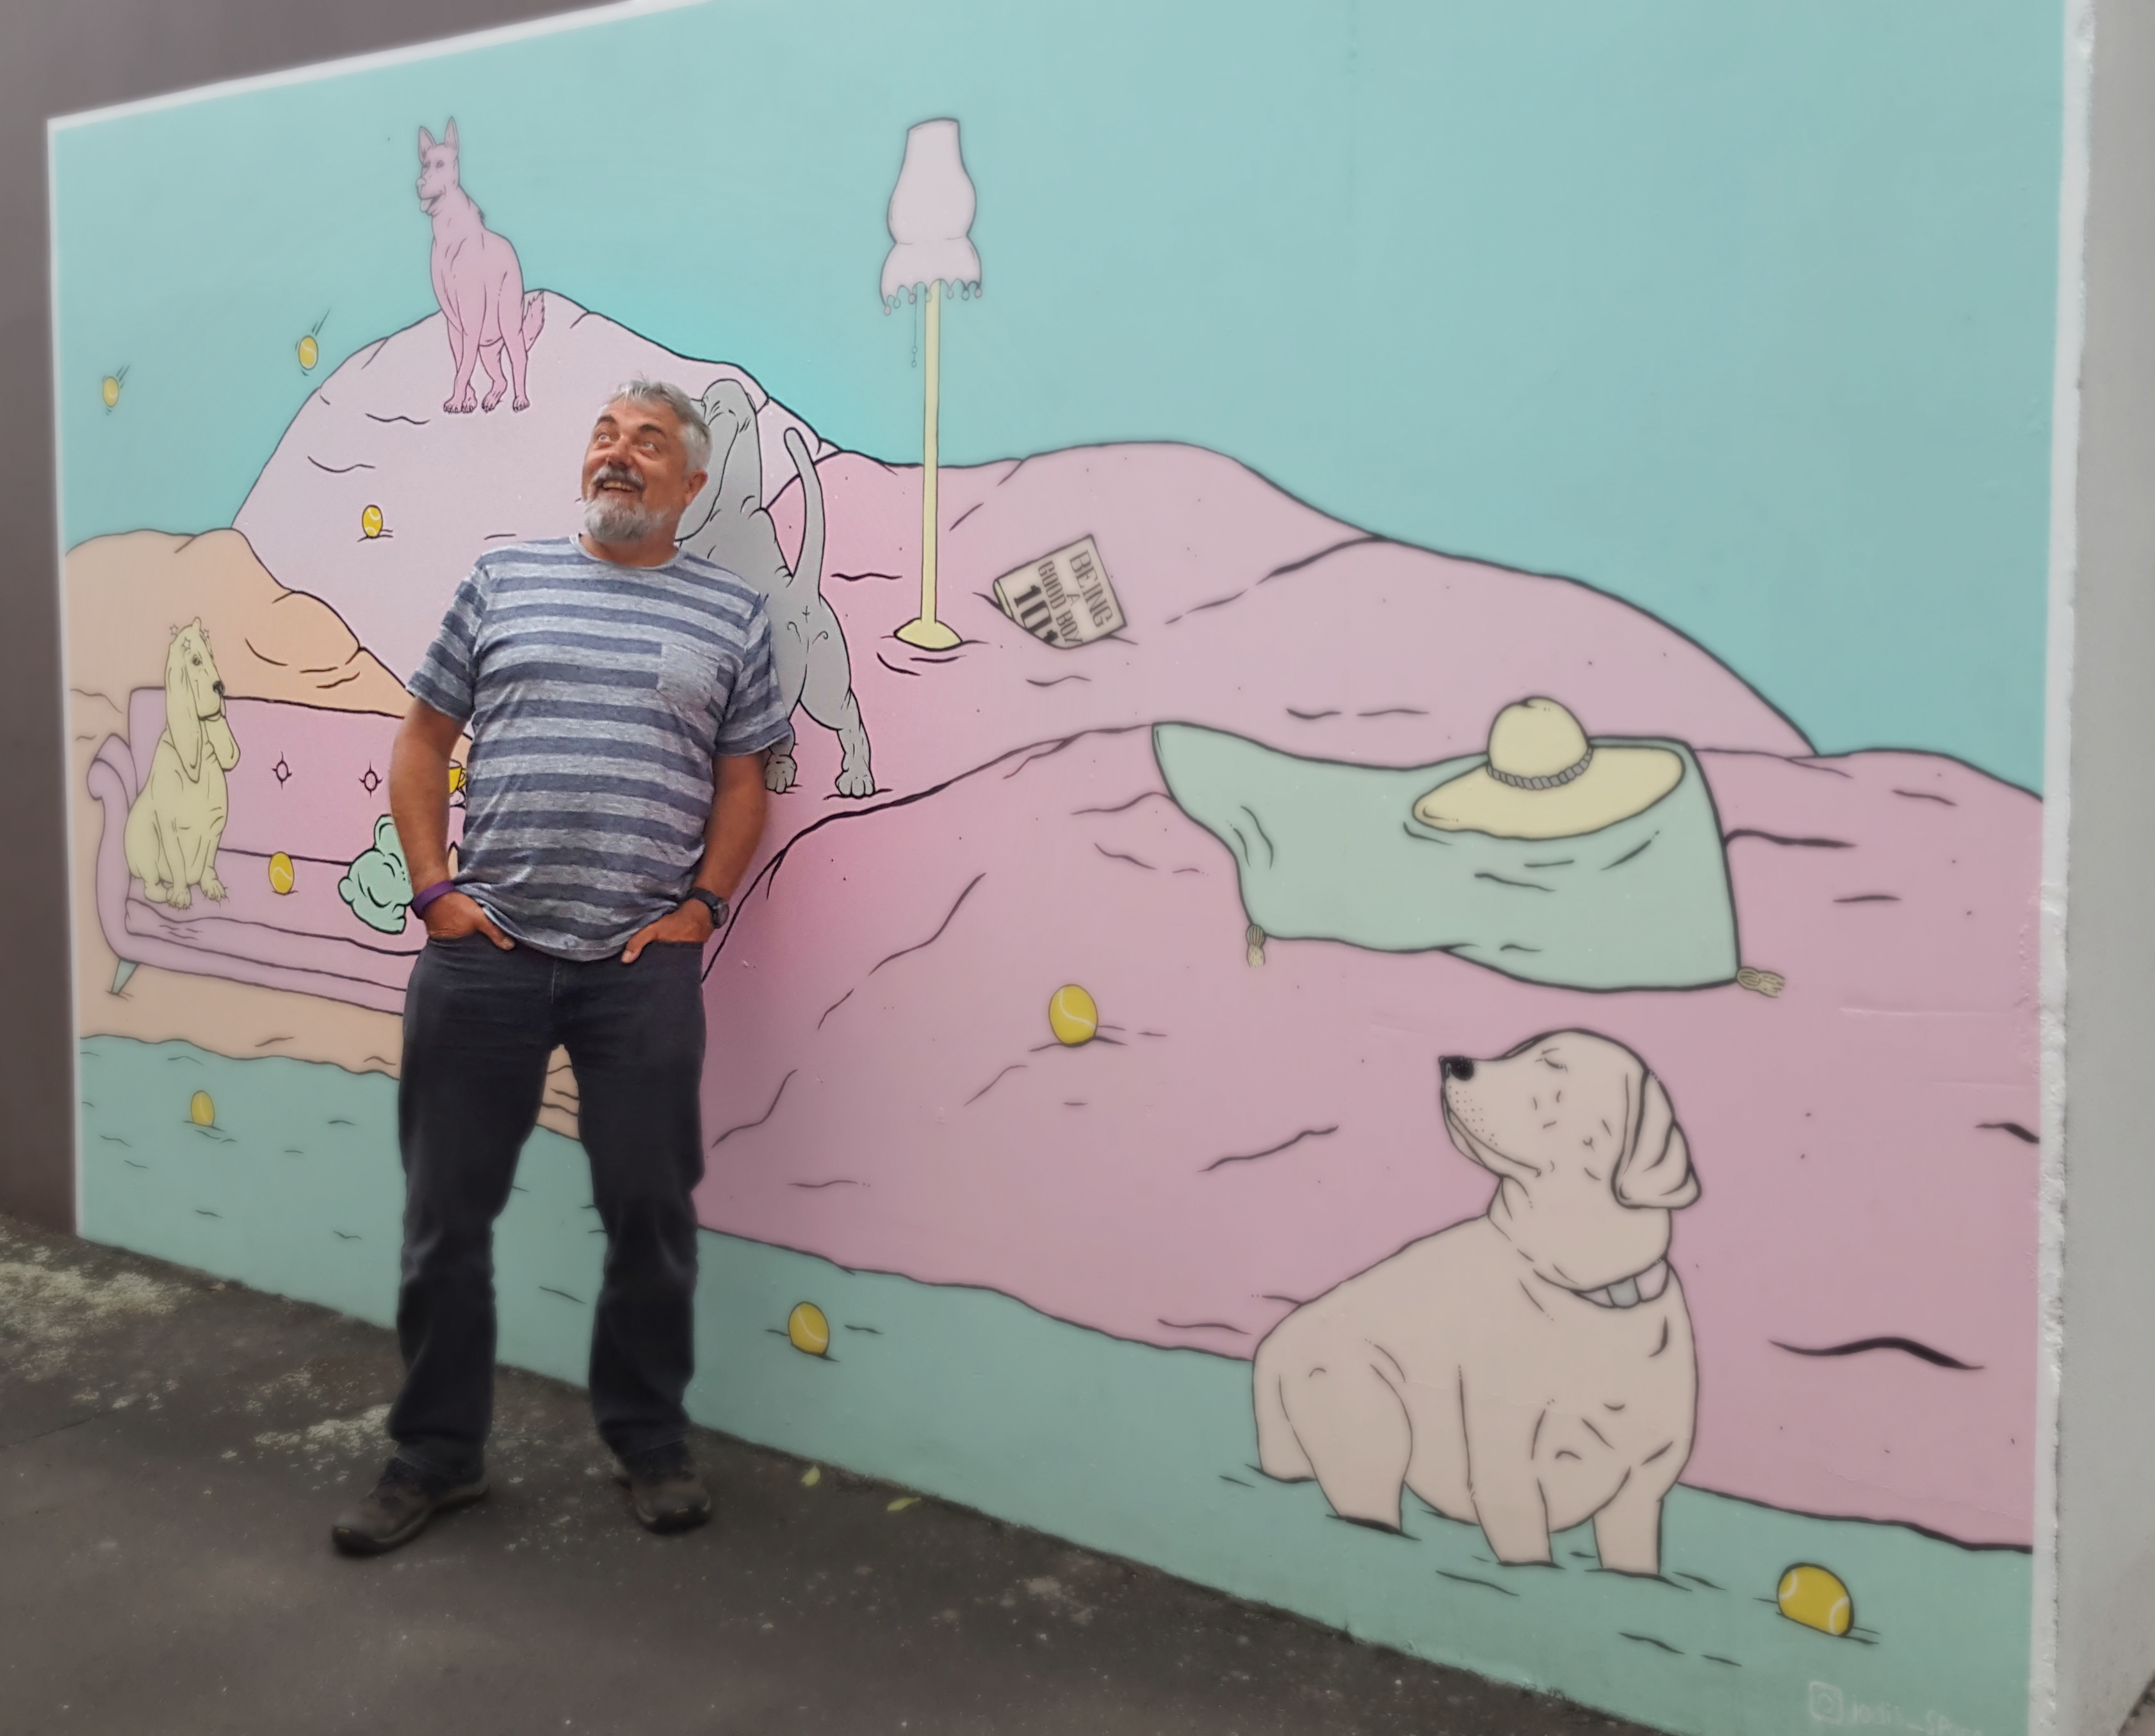 Man wearing a strpd tee-shirt and jeans standing against a painted wall looking upwards. The wall is painted pink and blue with a dog in the right corner and other dog paraphernalia across the painting